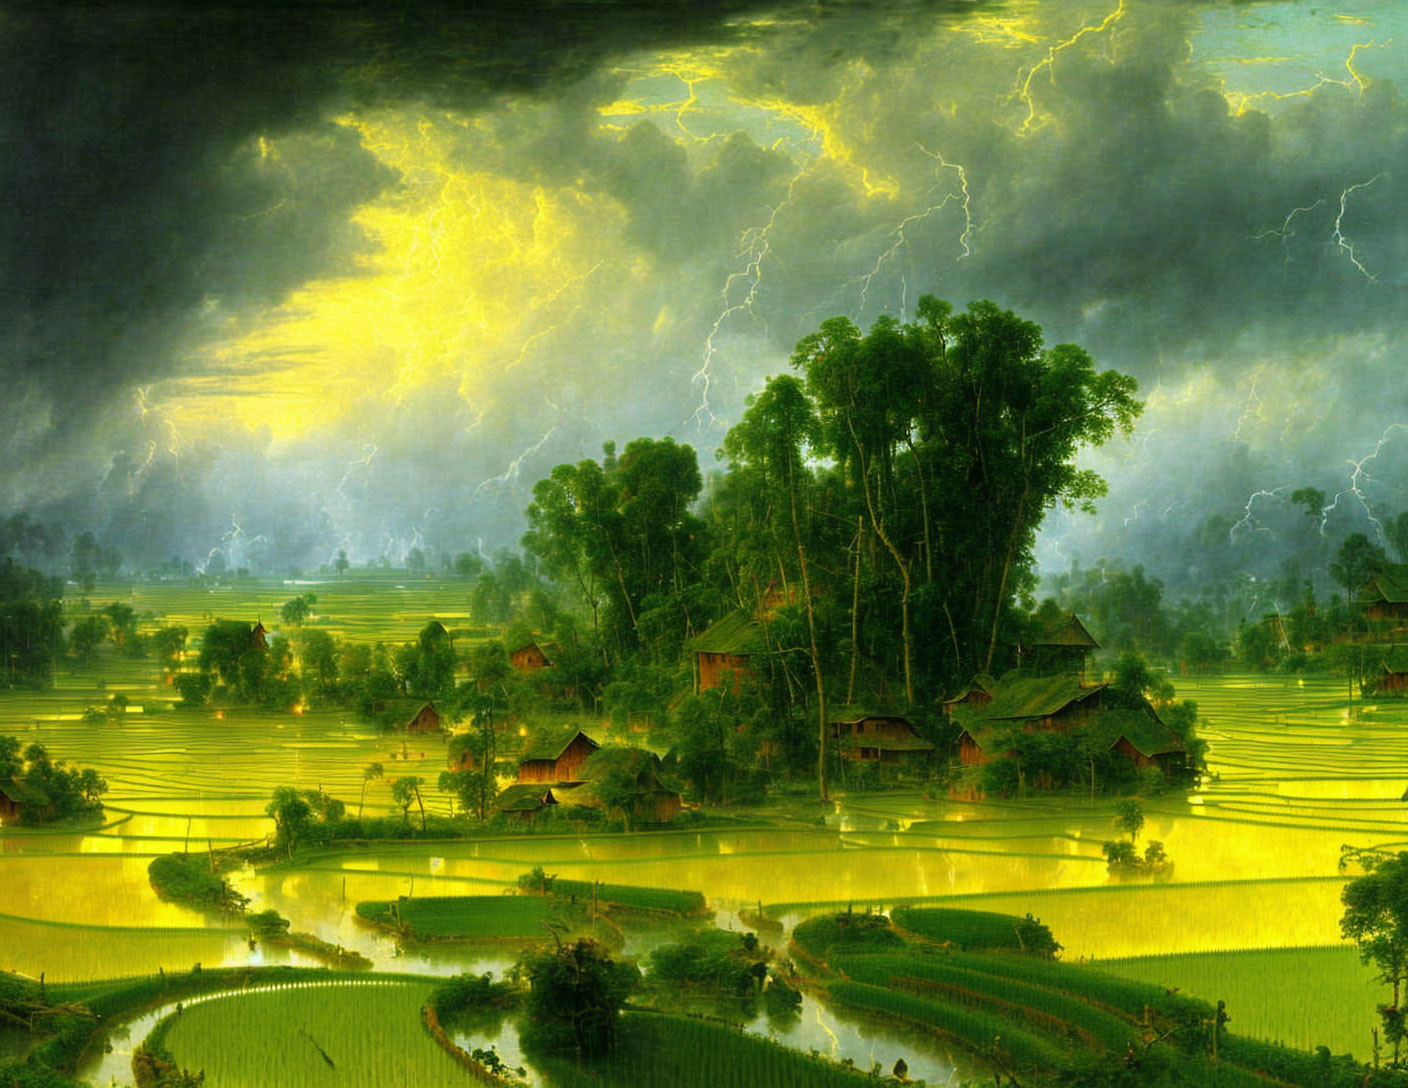 Thunderstorm landscape painting with serene village and rice paddies under dramatic sky